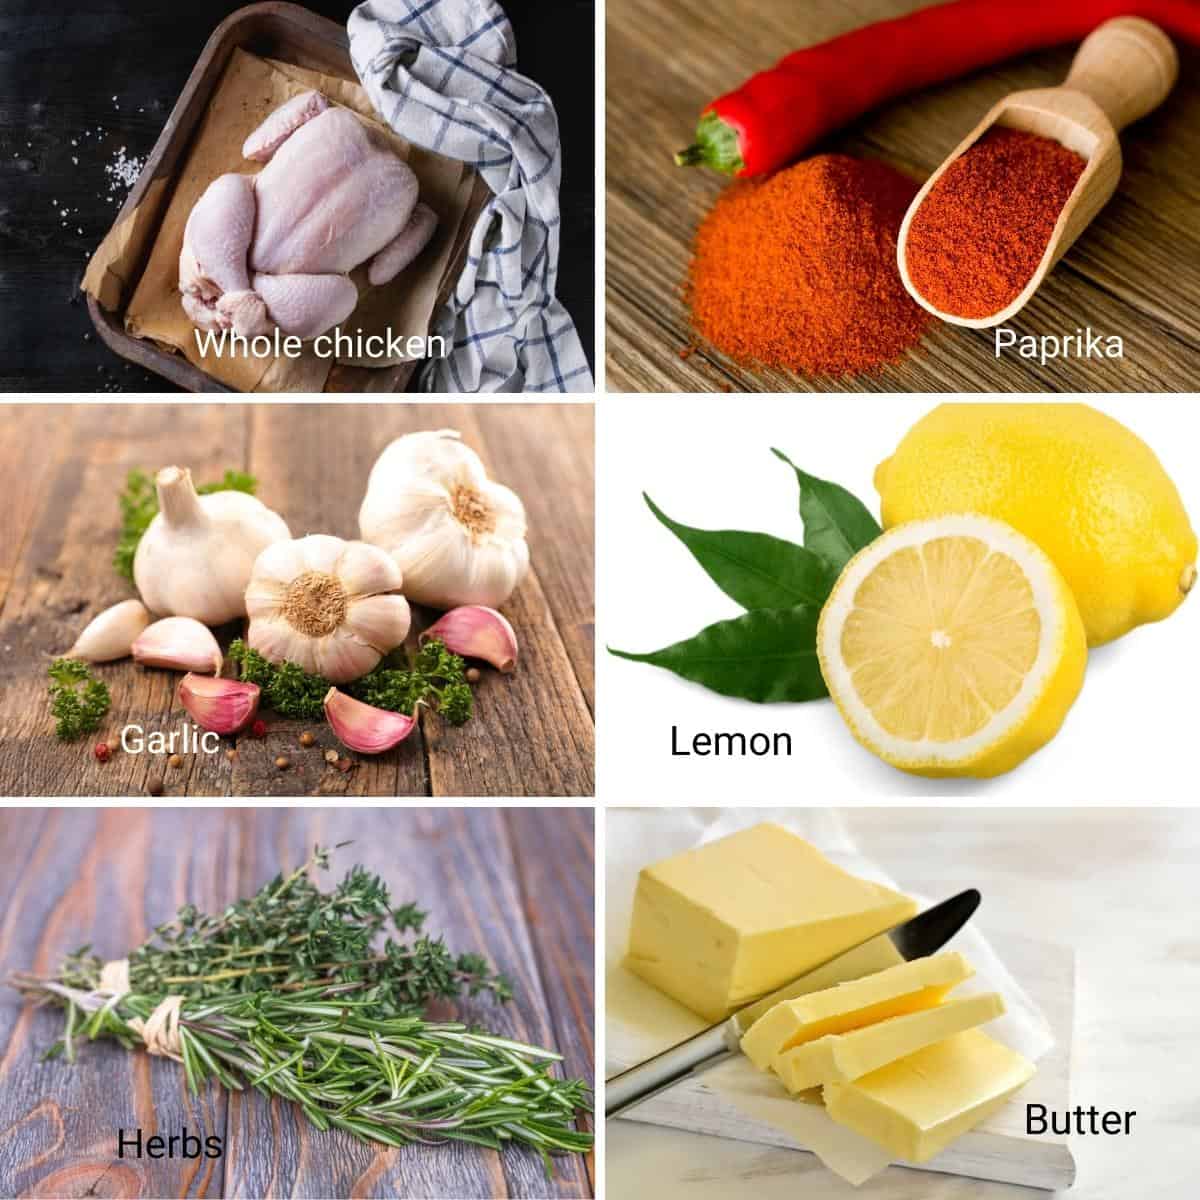 Ingredients for roasting a whole chicken in the oven.